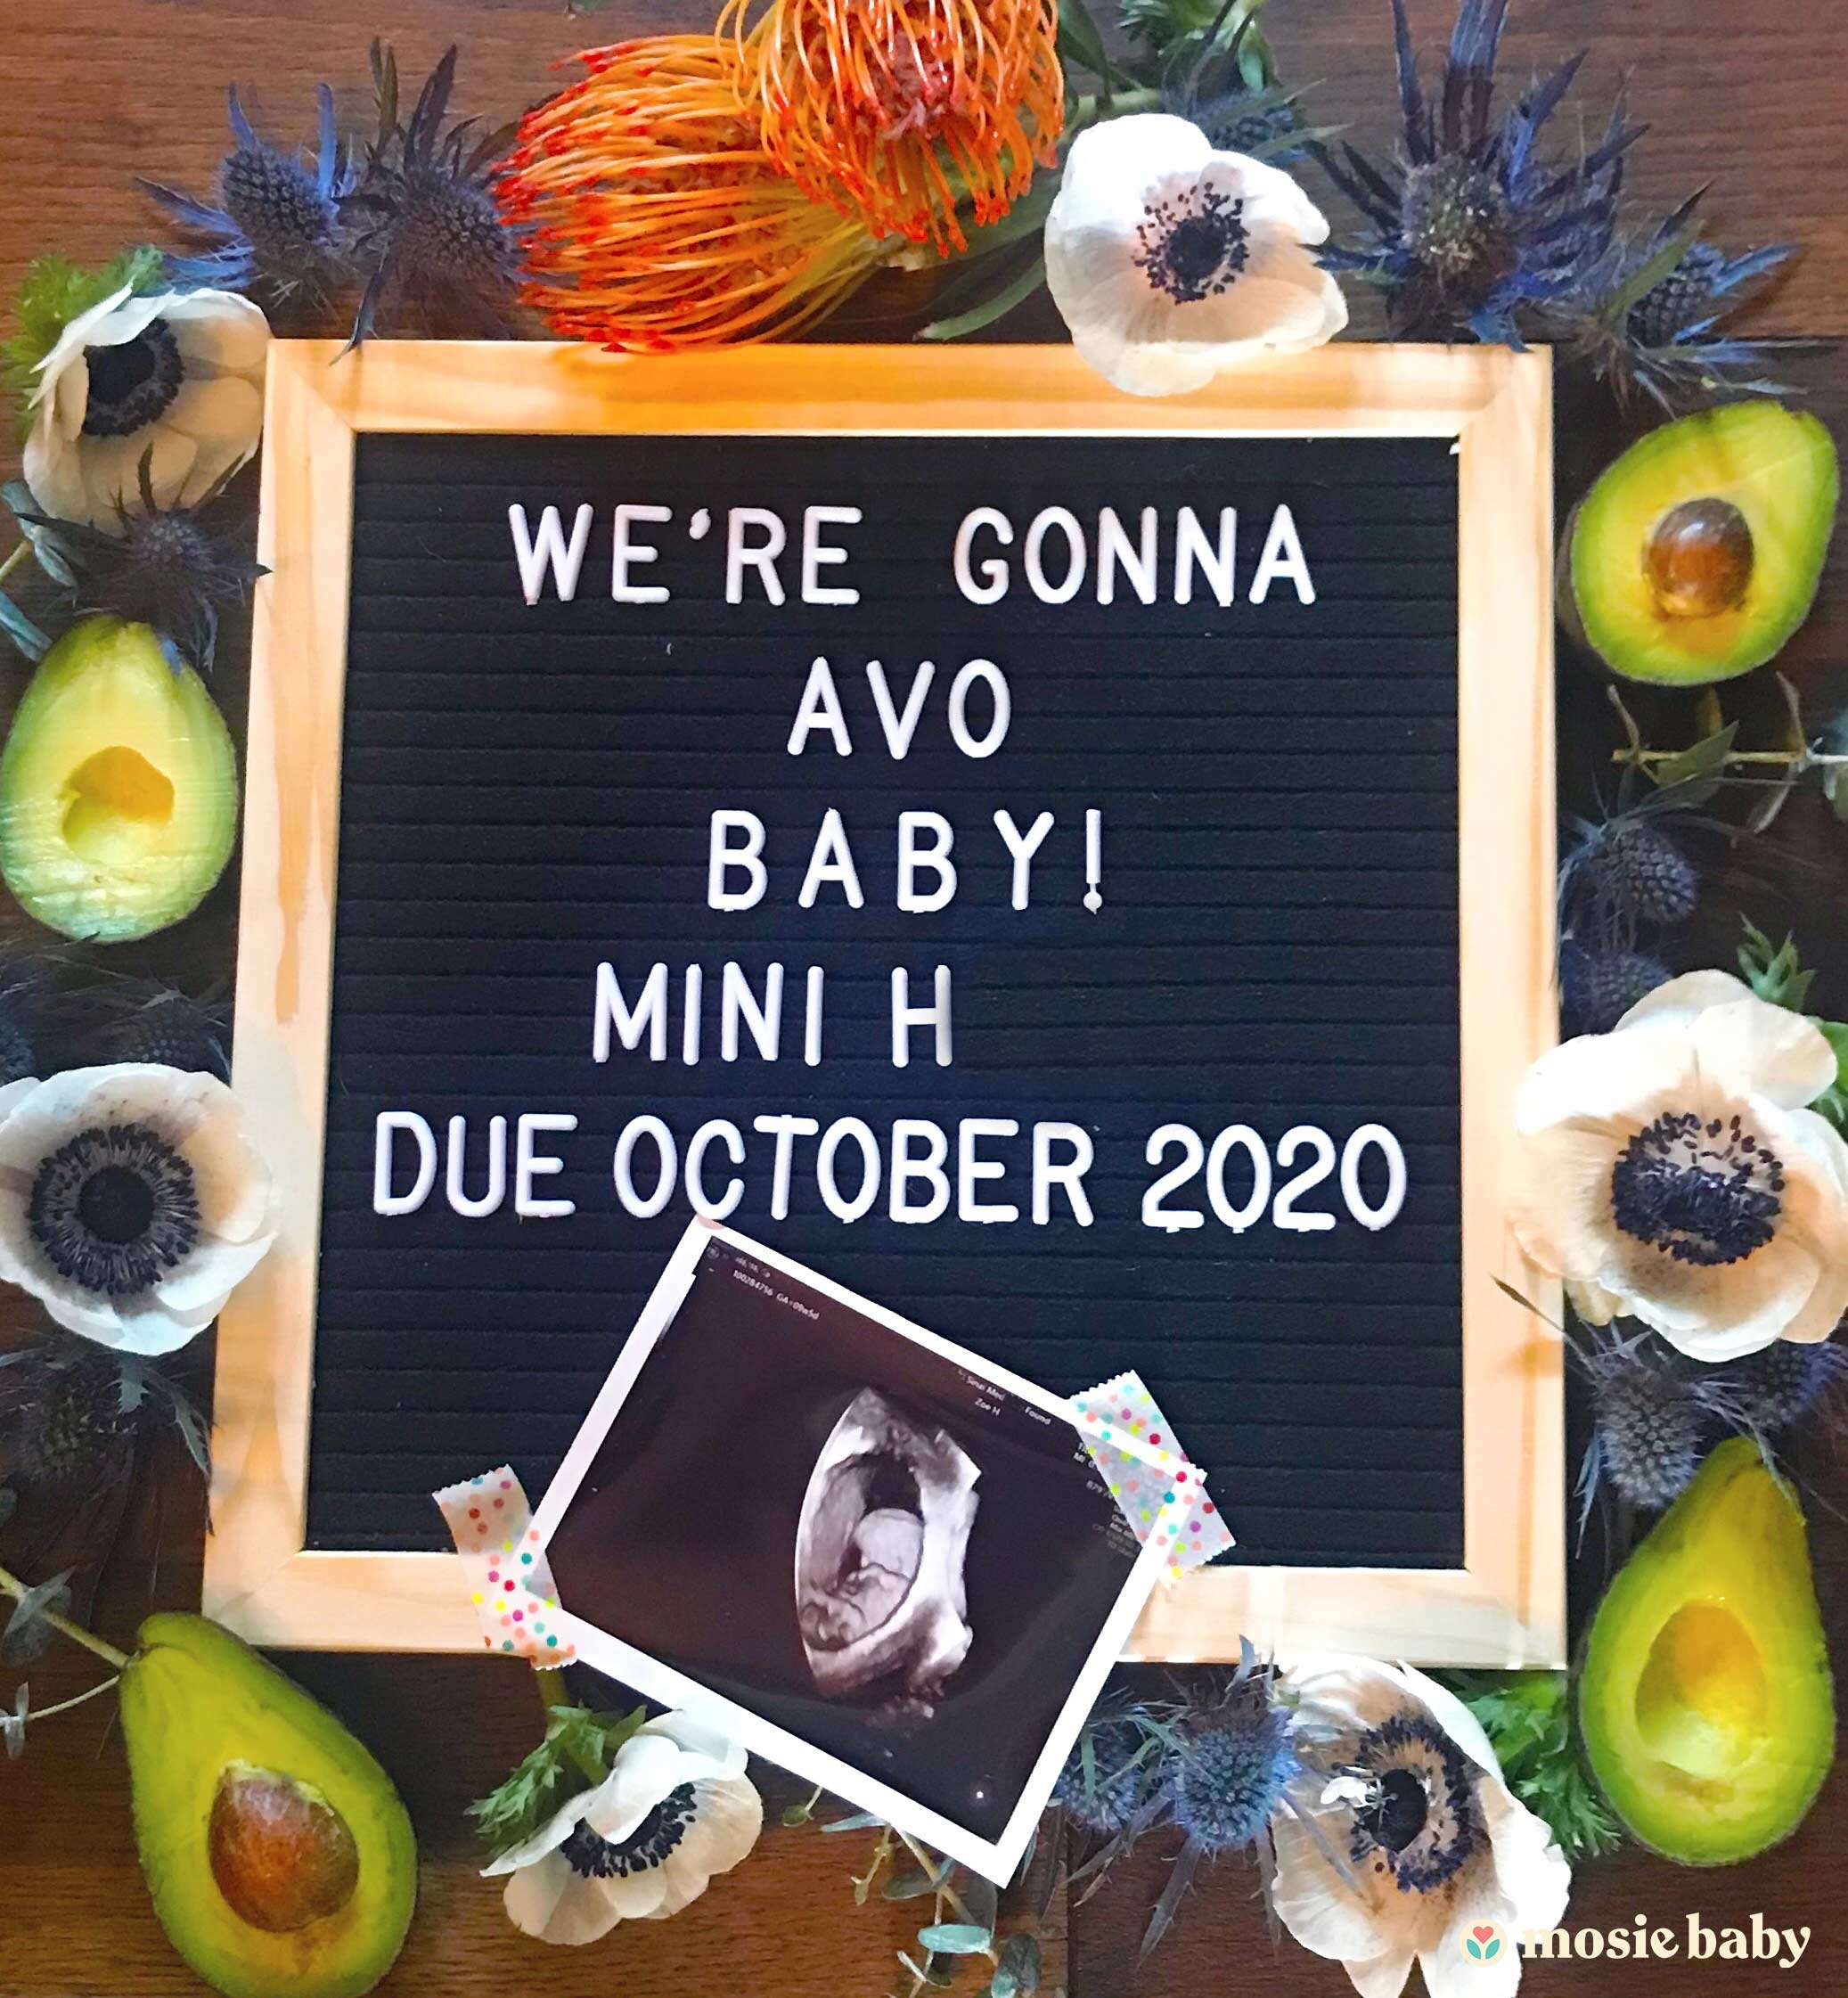 Mosie Baby pregnancy announcement with avocados